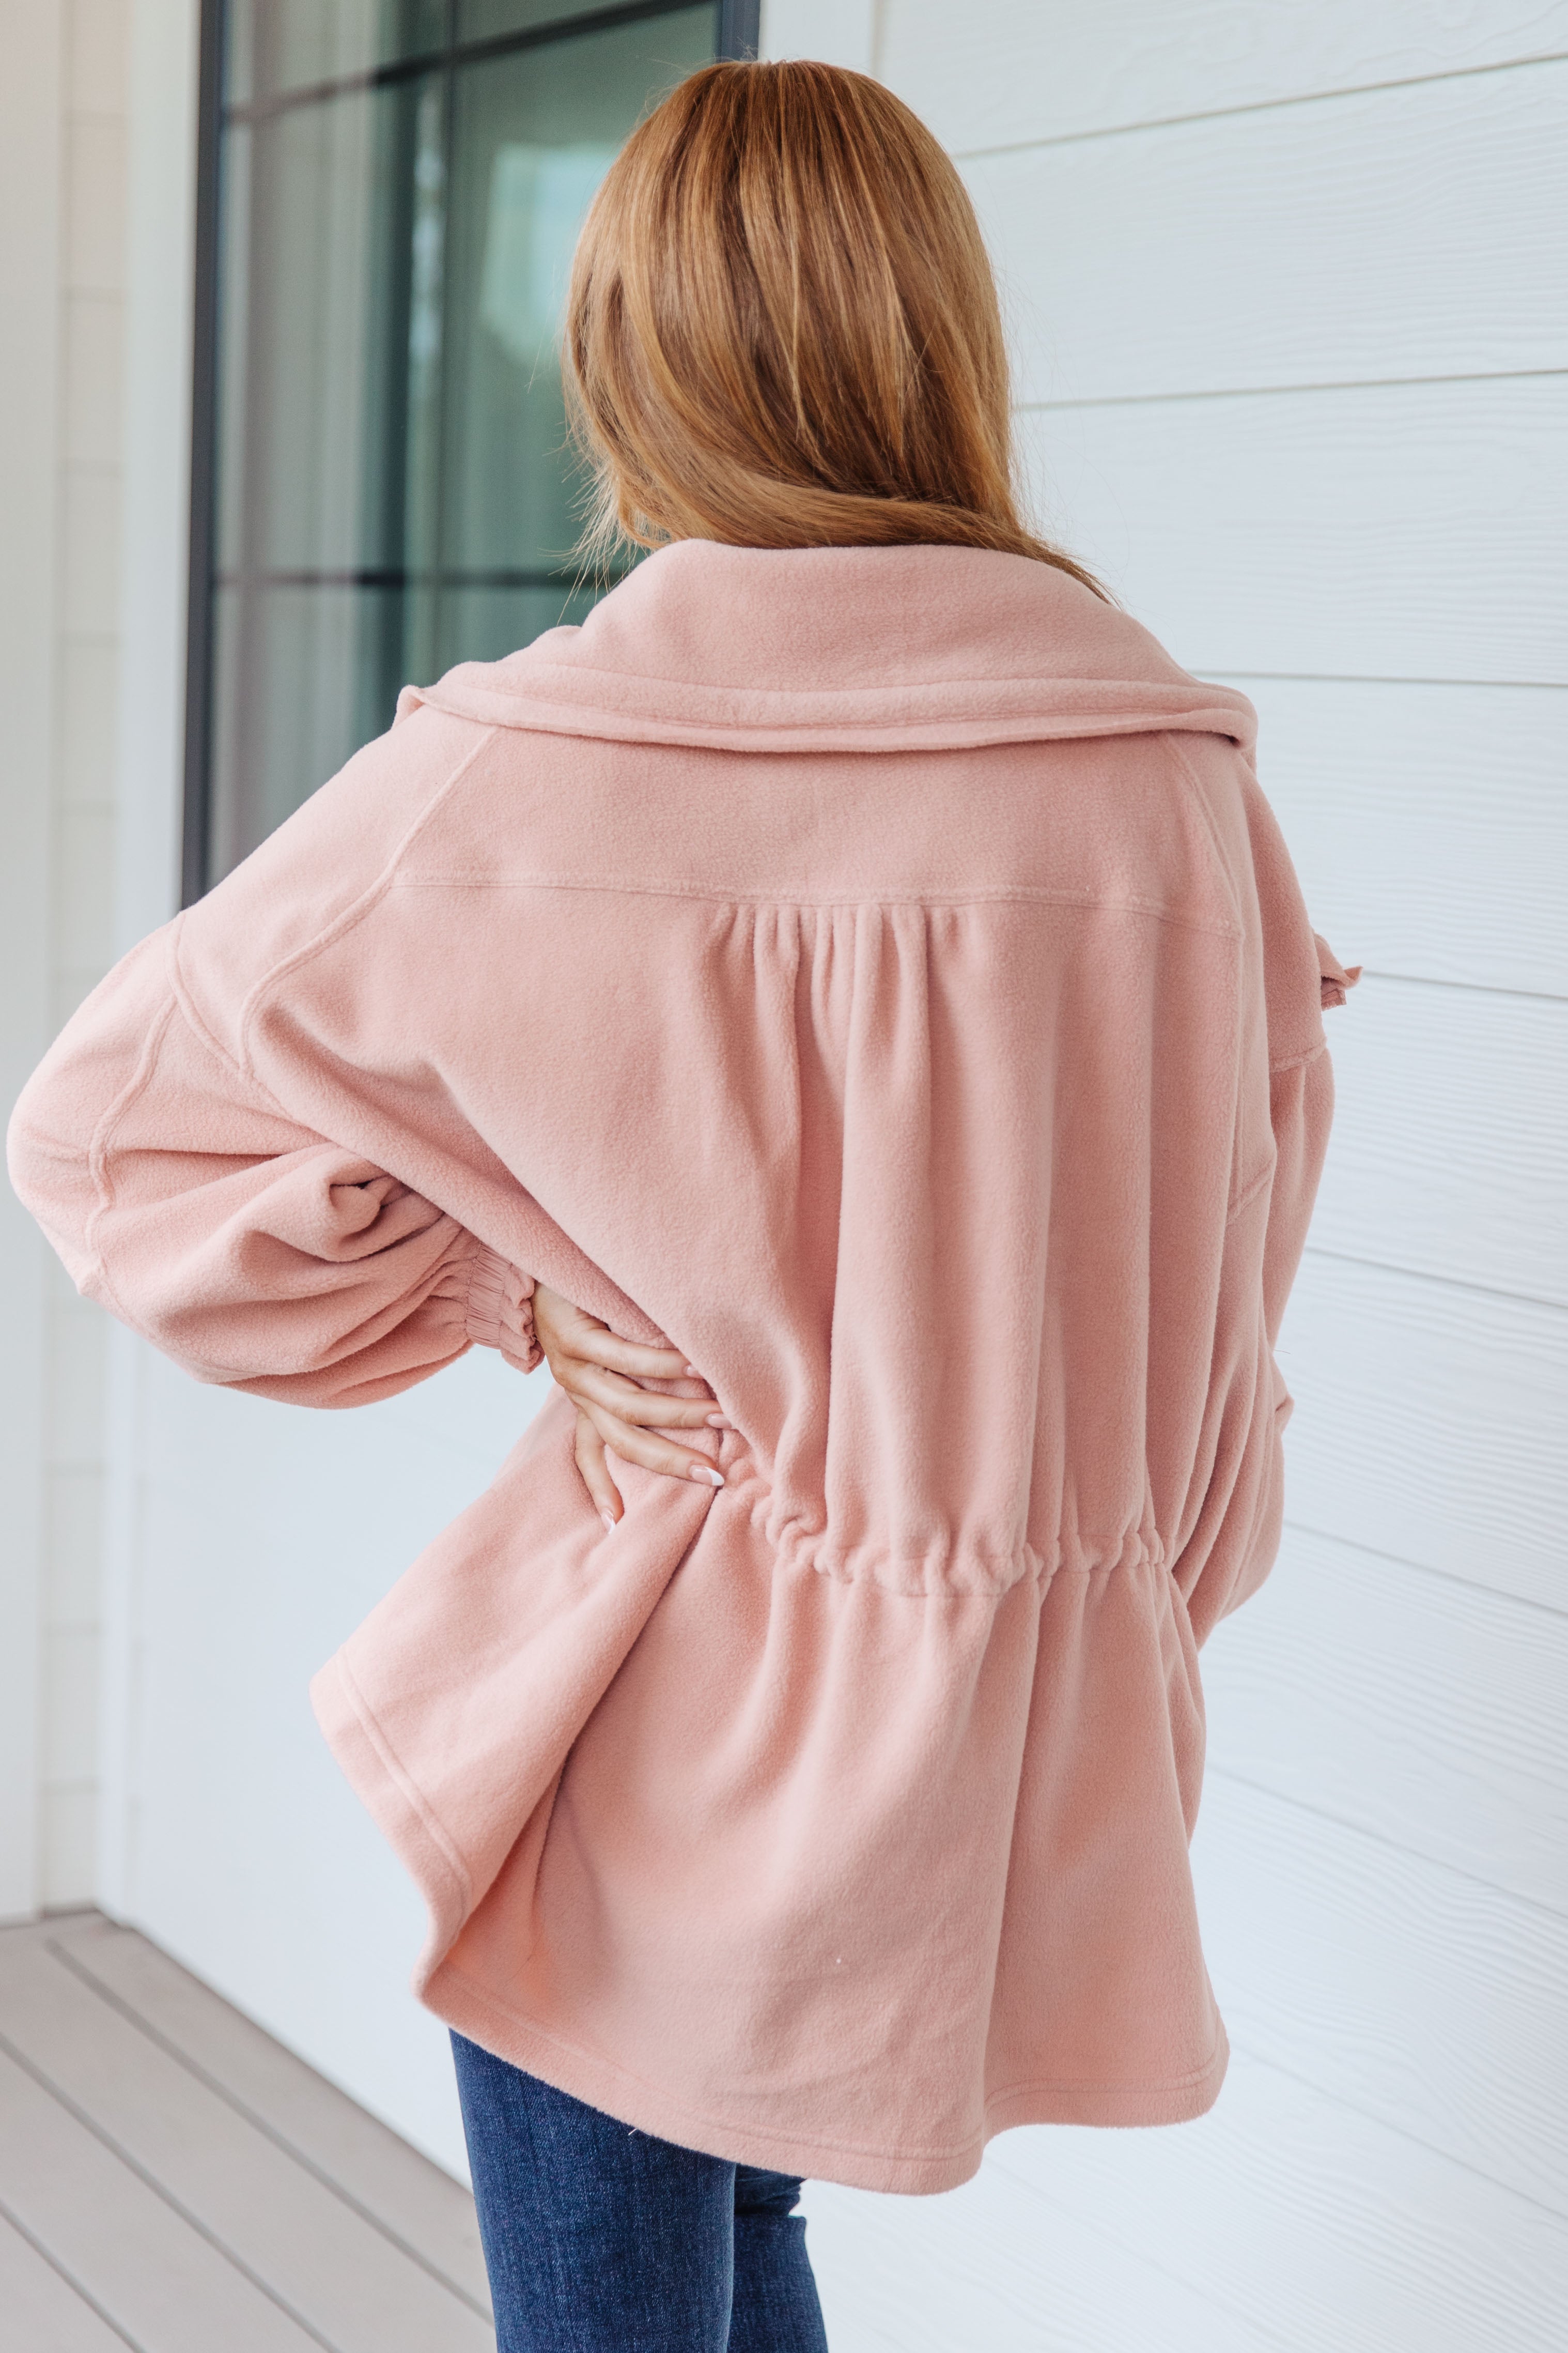 Zipped and Cinched Zip Up Jacket - Lola Cerina Boutique